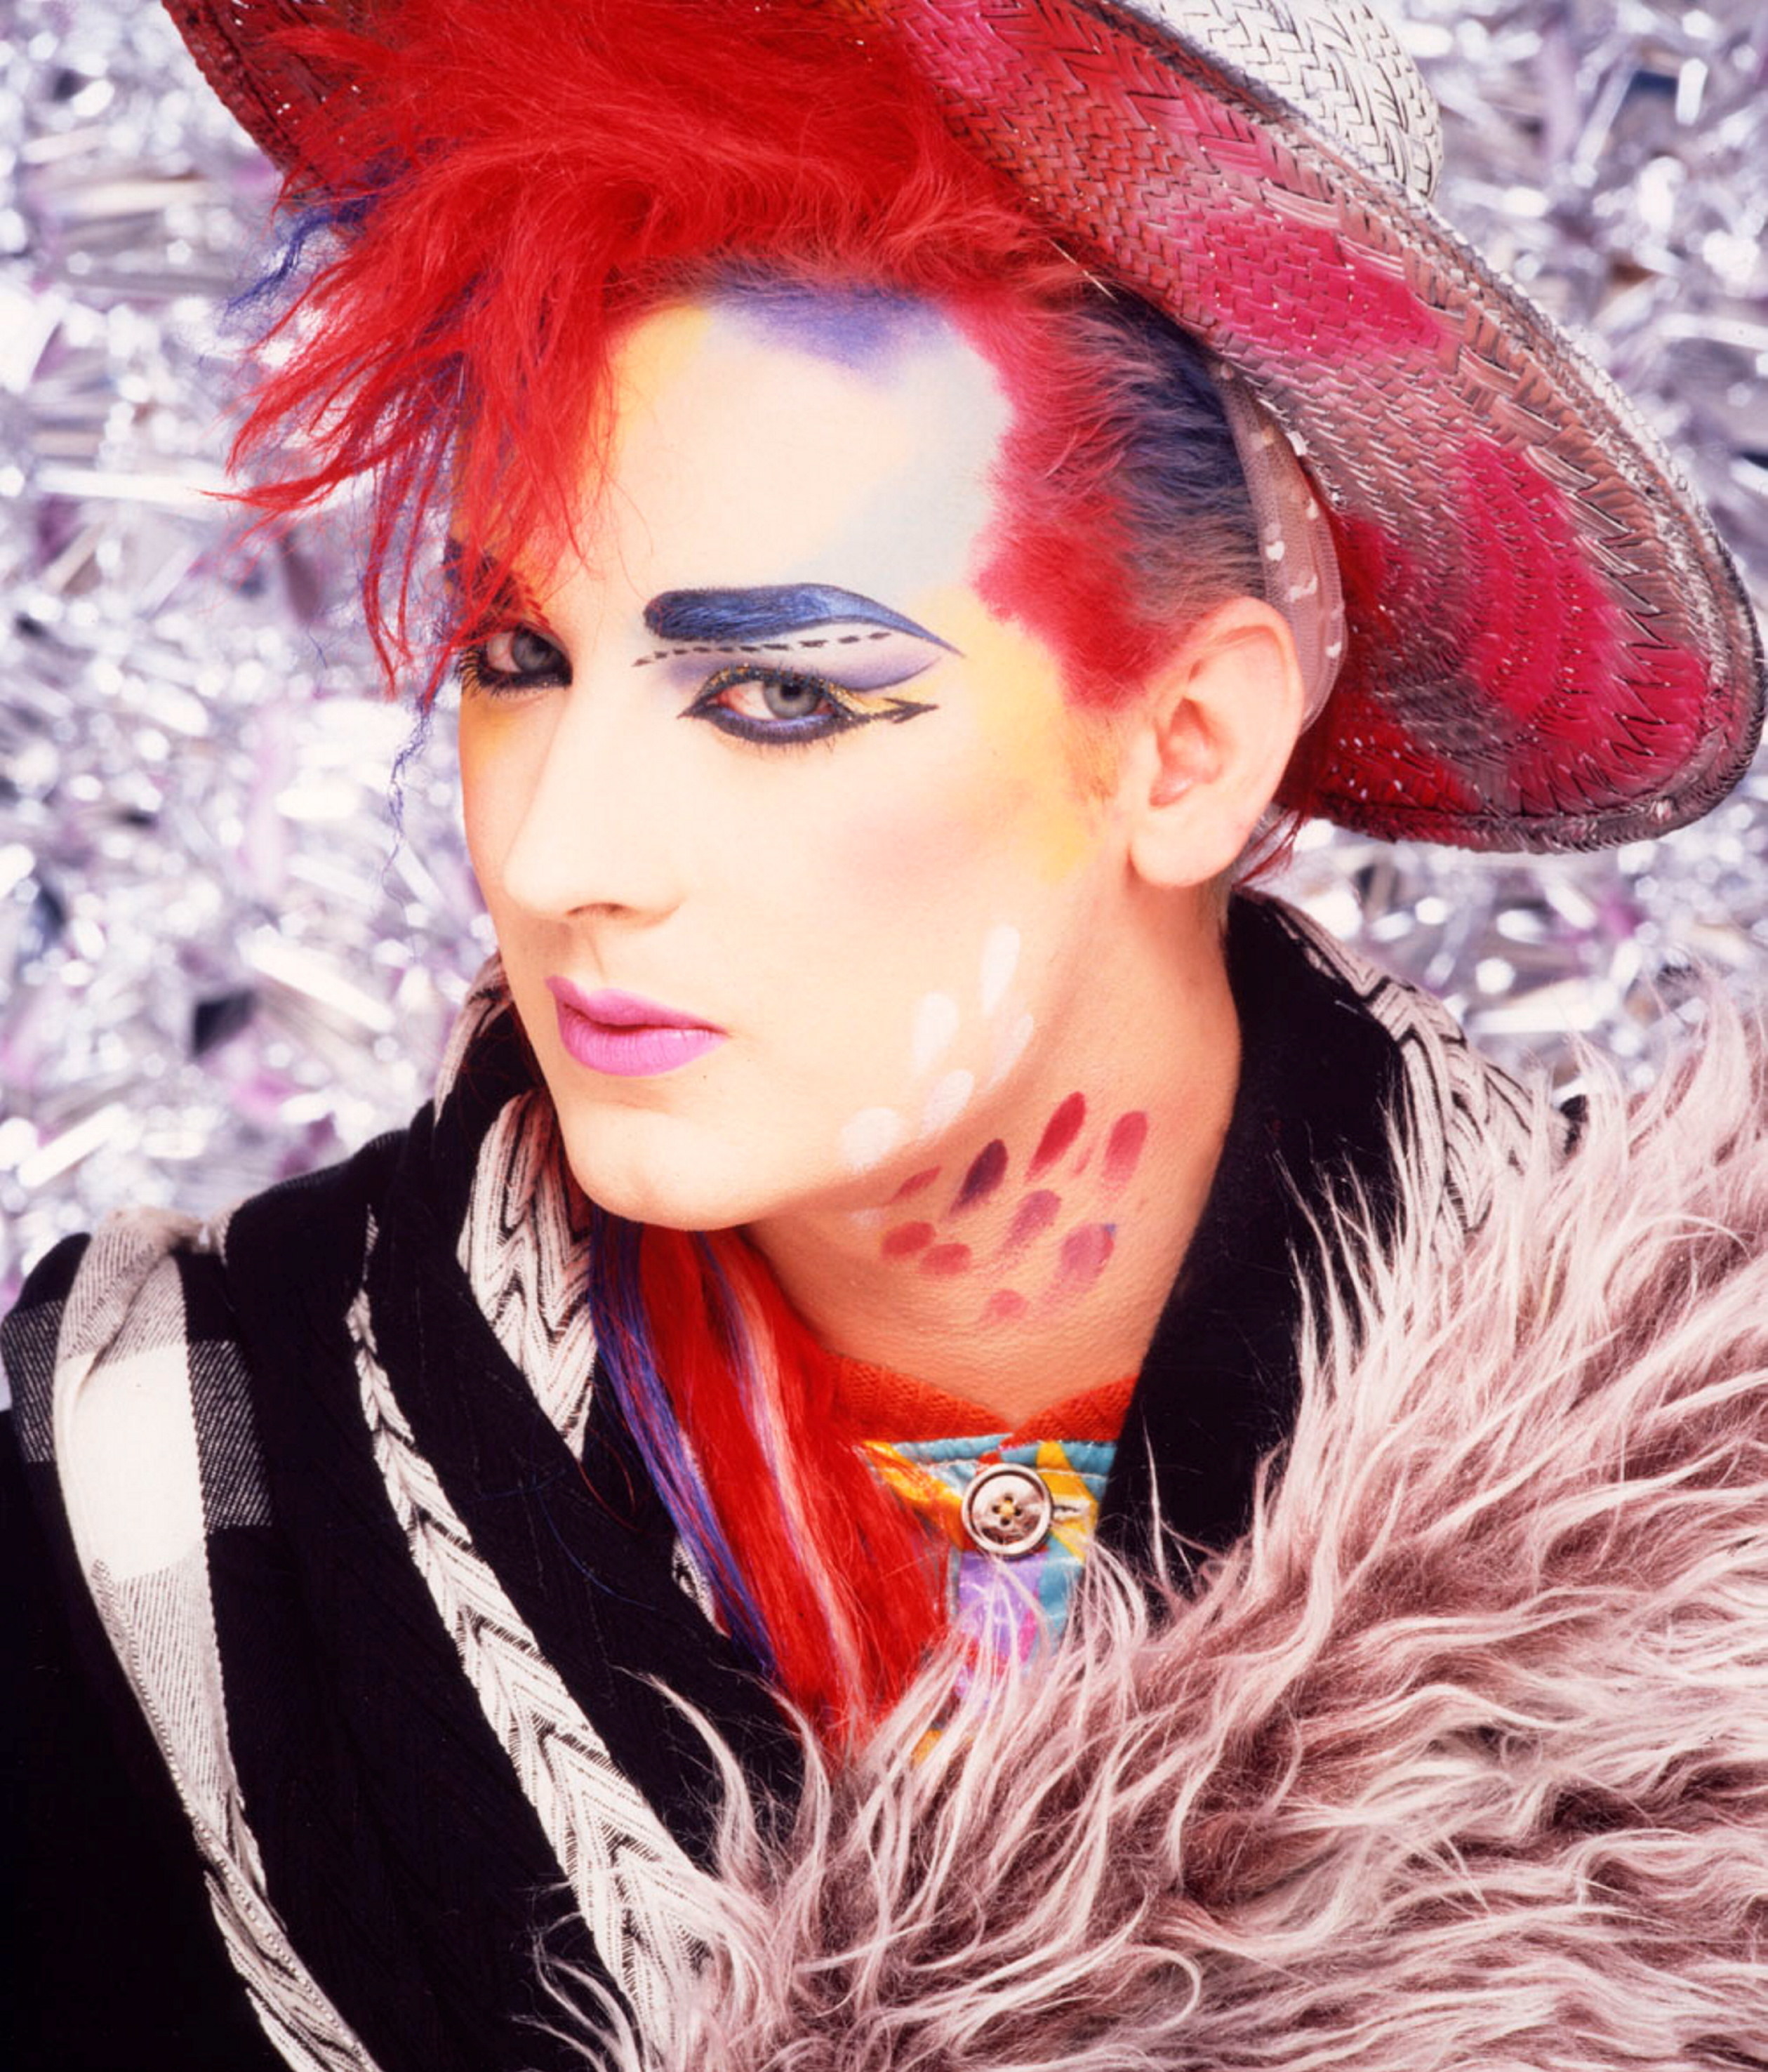 Boy George from Culture Club posed in London in 1984